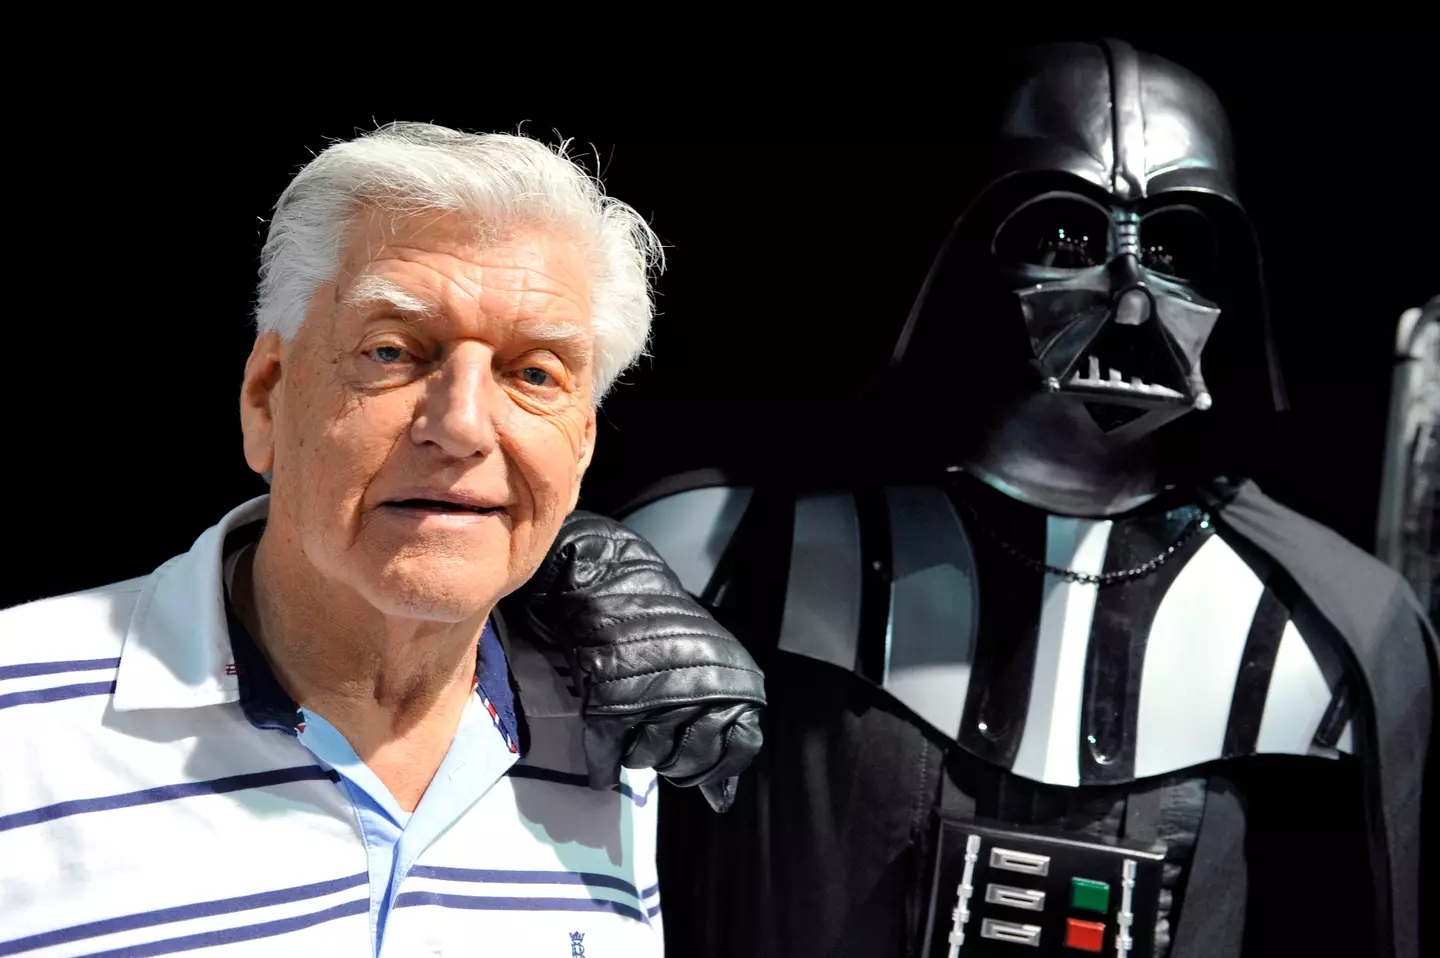 David Prowse provided the physical performance for Darth Vader, but his voice wasn't quite right for the character.